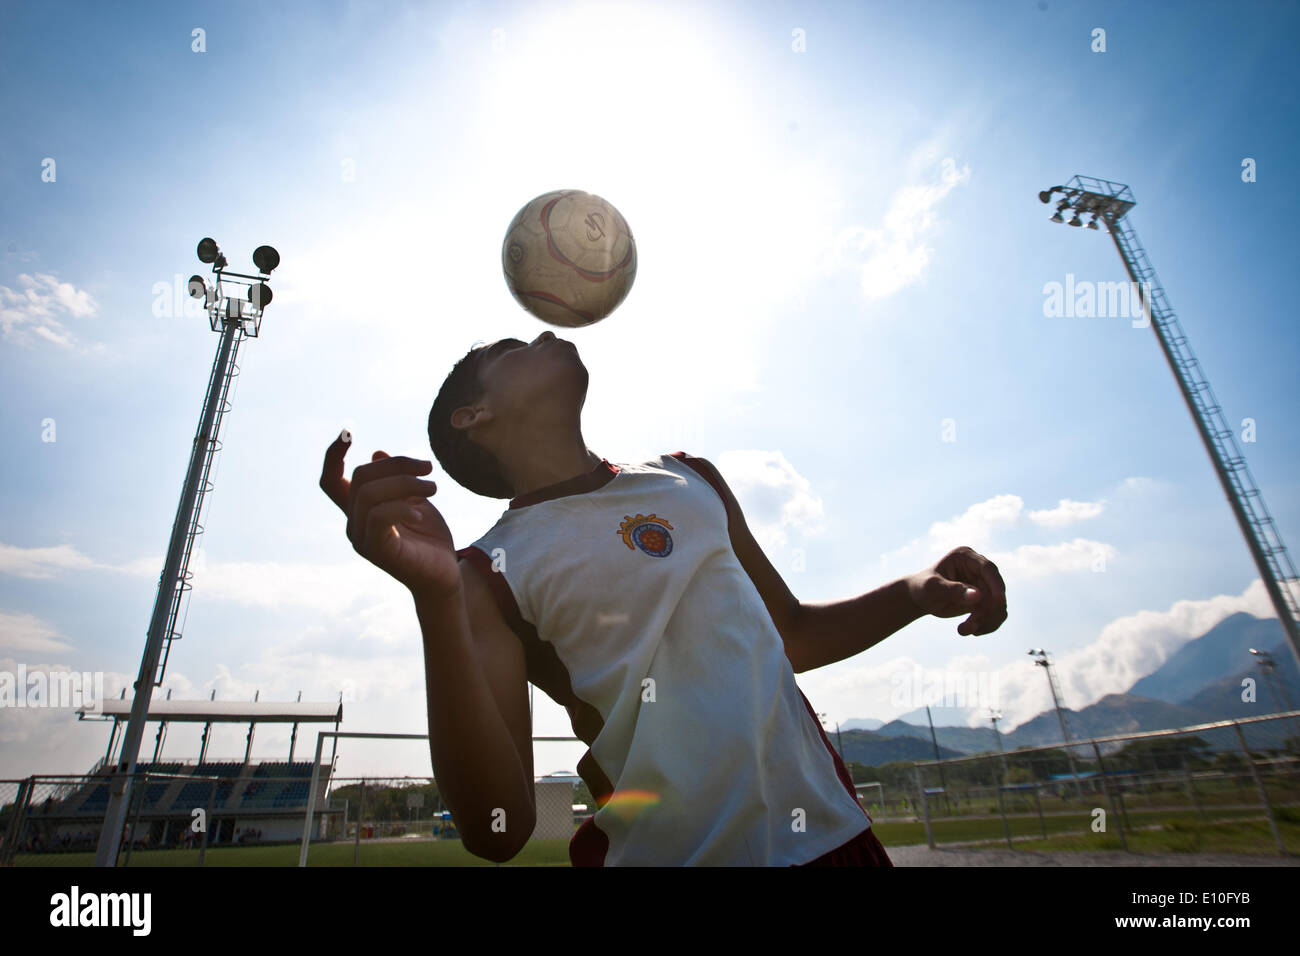 (140521) -- VALENCIA, May 21, 2014 (Xinhua) -- Image taken on May 17, 2014 shows a kid that belongs to one of the 11 seats of the Soccer School 'Juan Arango' Foundation taking part in a training in Valencia, Carabobo state, Venezuela. The Foundation seeks to catch, promote and encourage the practice of soccer among the youngest kids. (Xinhua/Carlos Ramirez) (da) (rt) Stock Photo